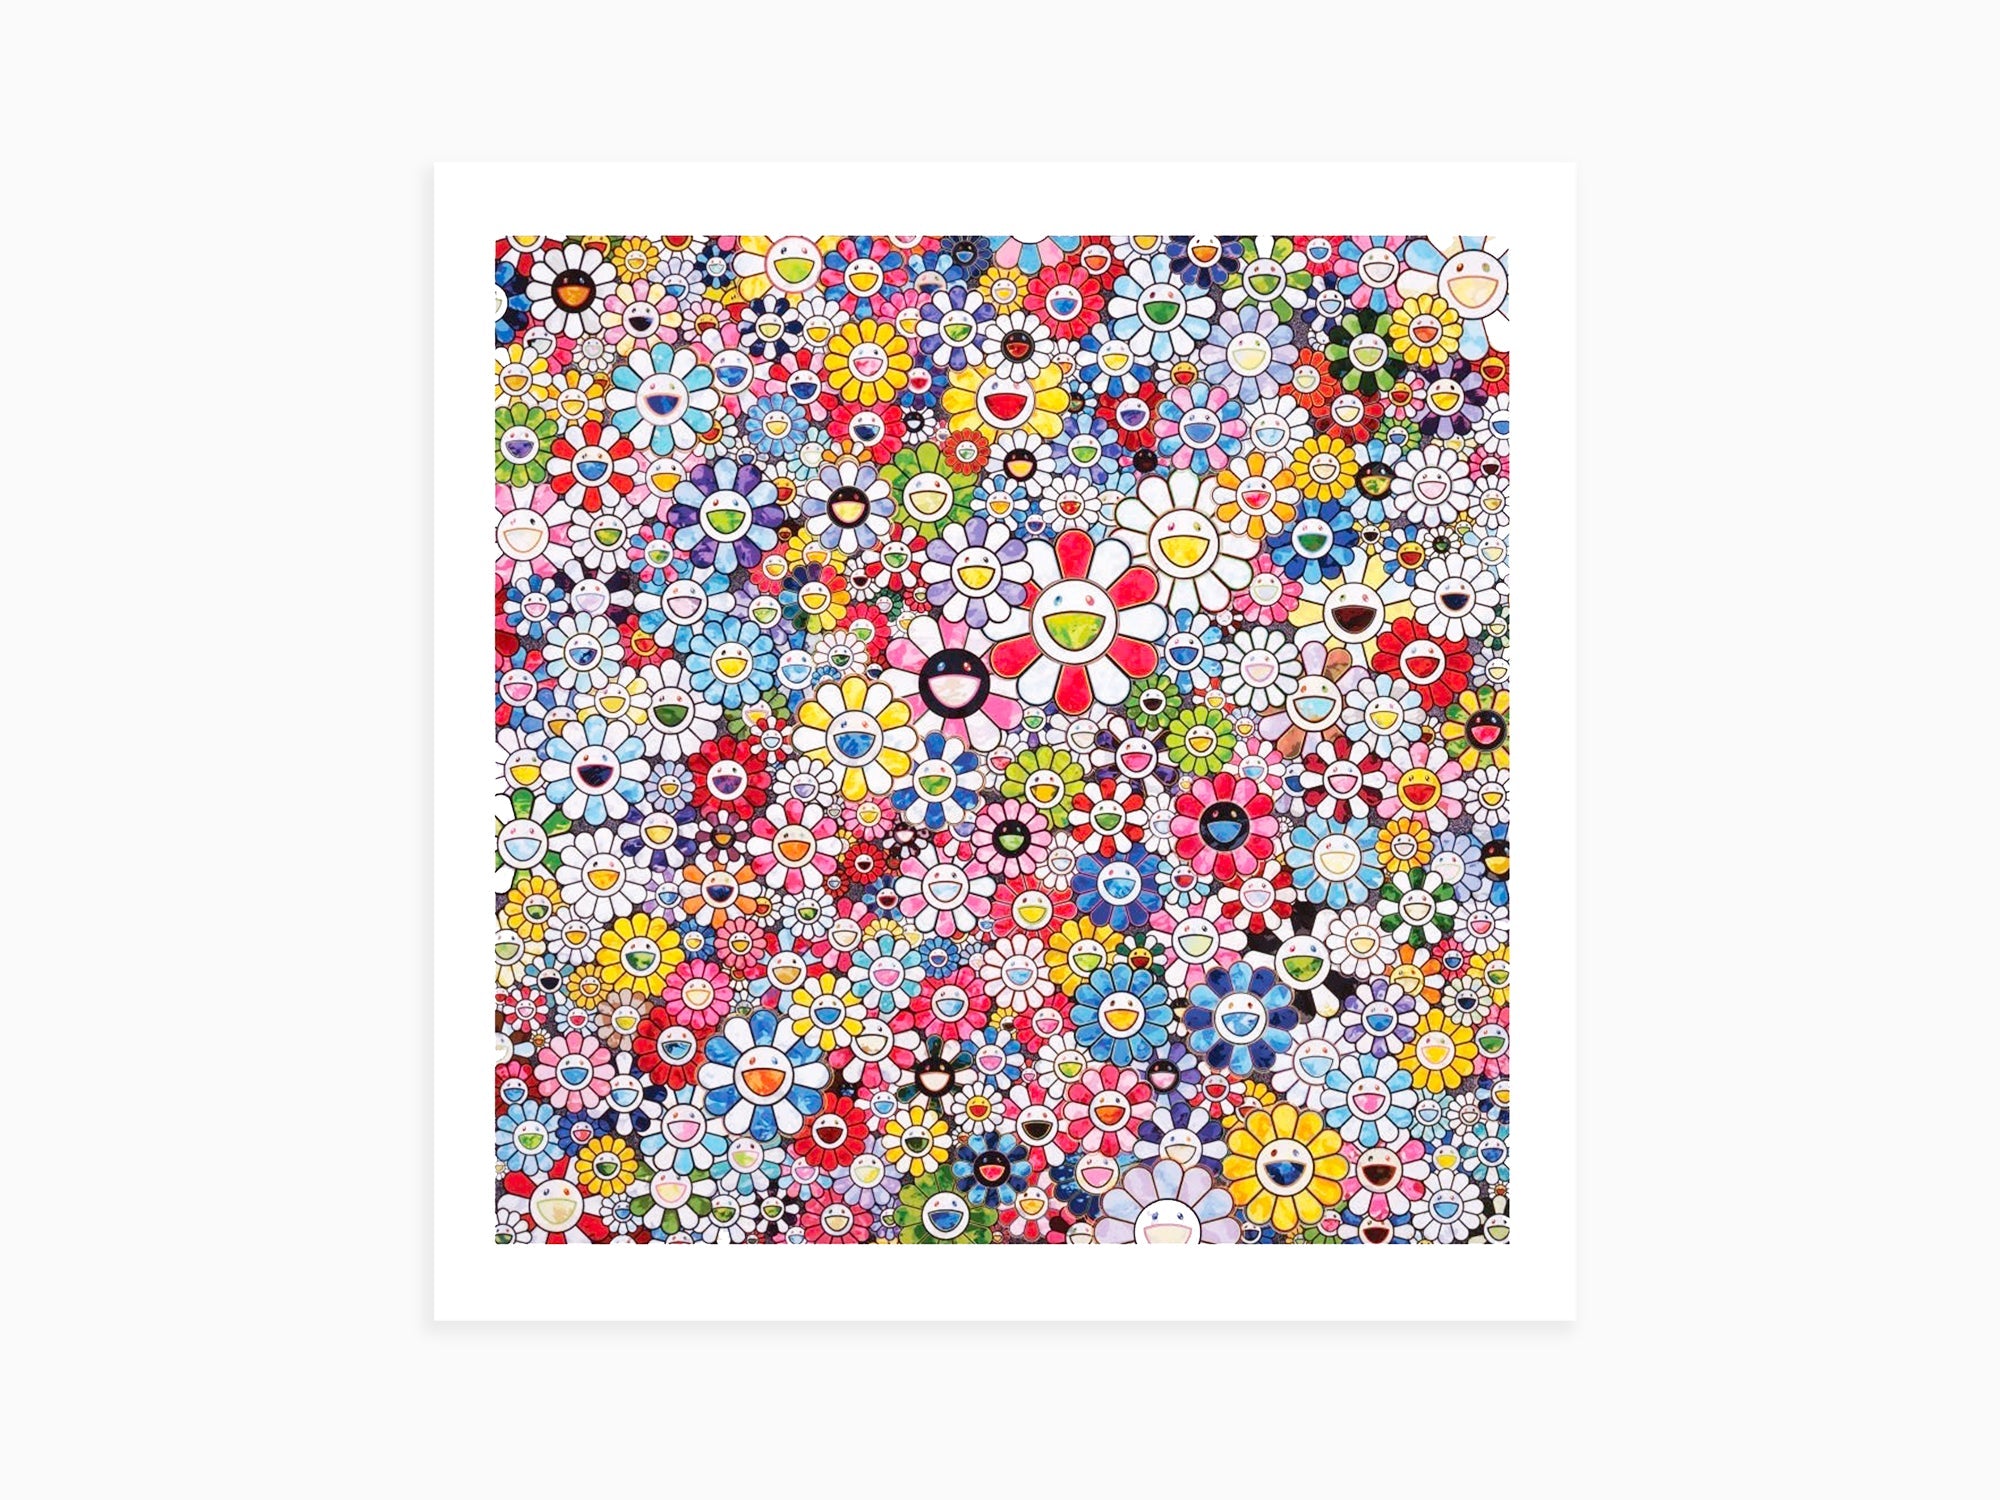 Takashi Murakami - Flowers with Smiley Faces